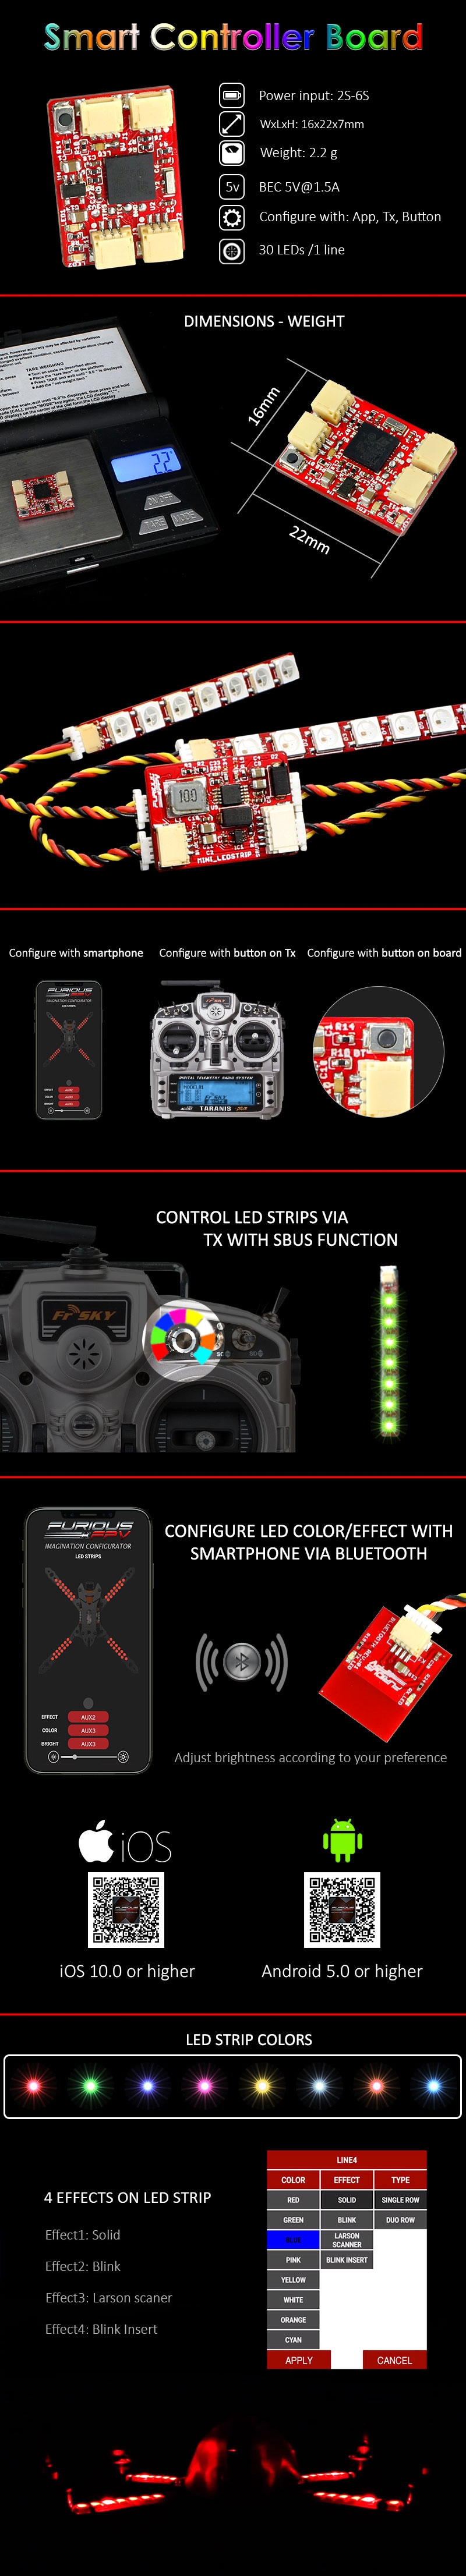 FuriousFPV LED Strip Smart Controller Board With Bluetooth Module For RC Drone